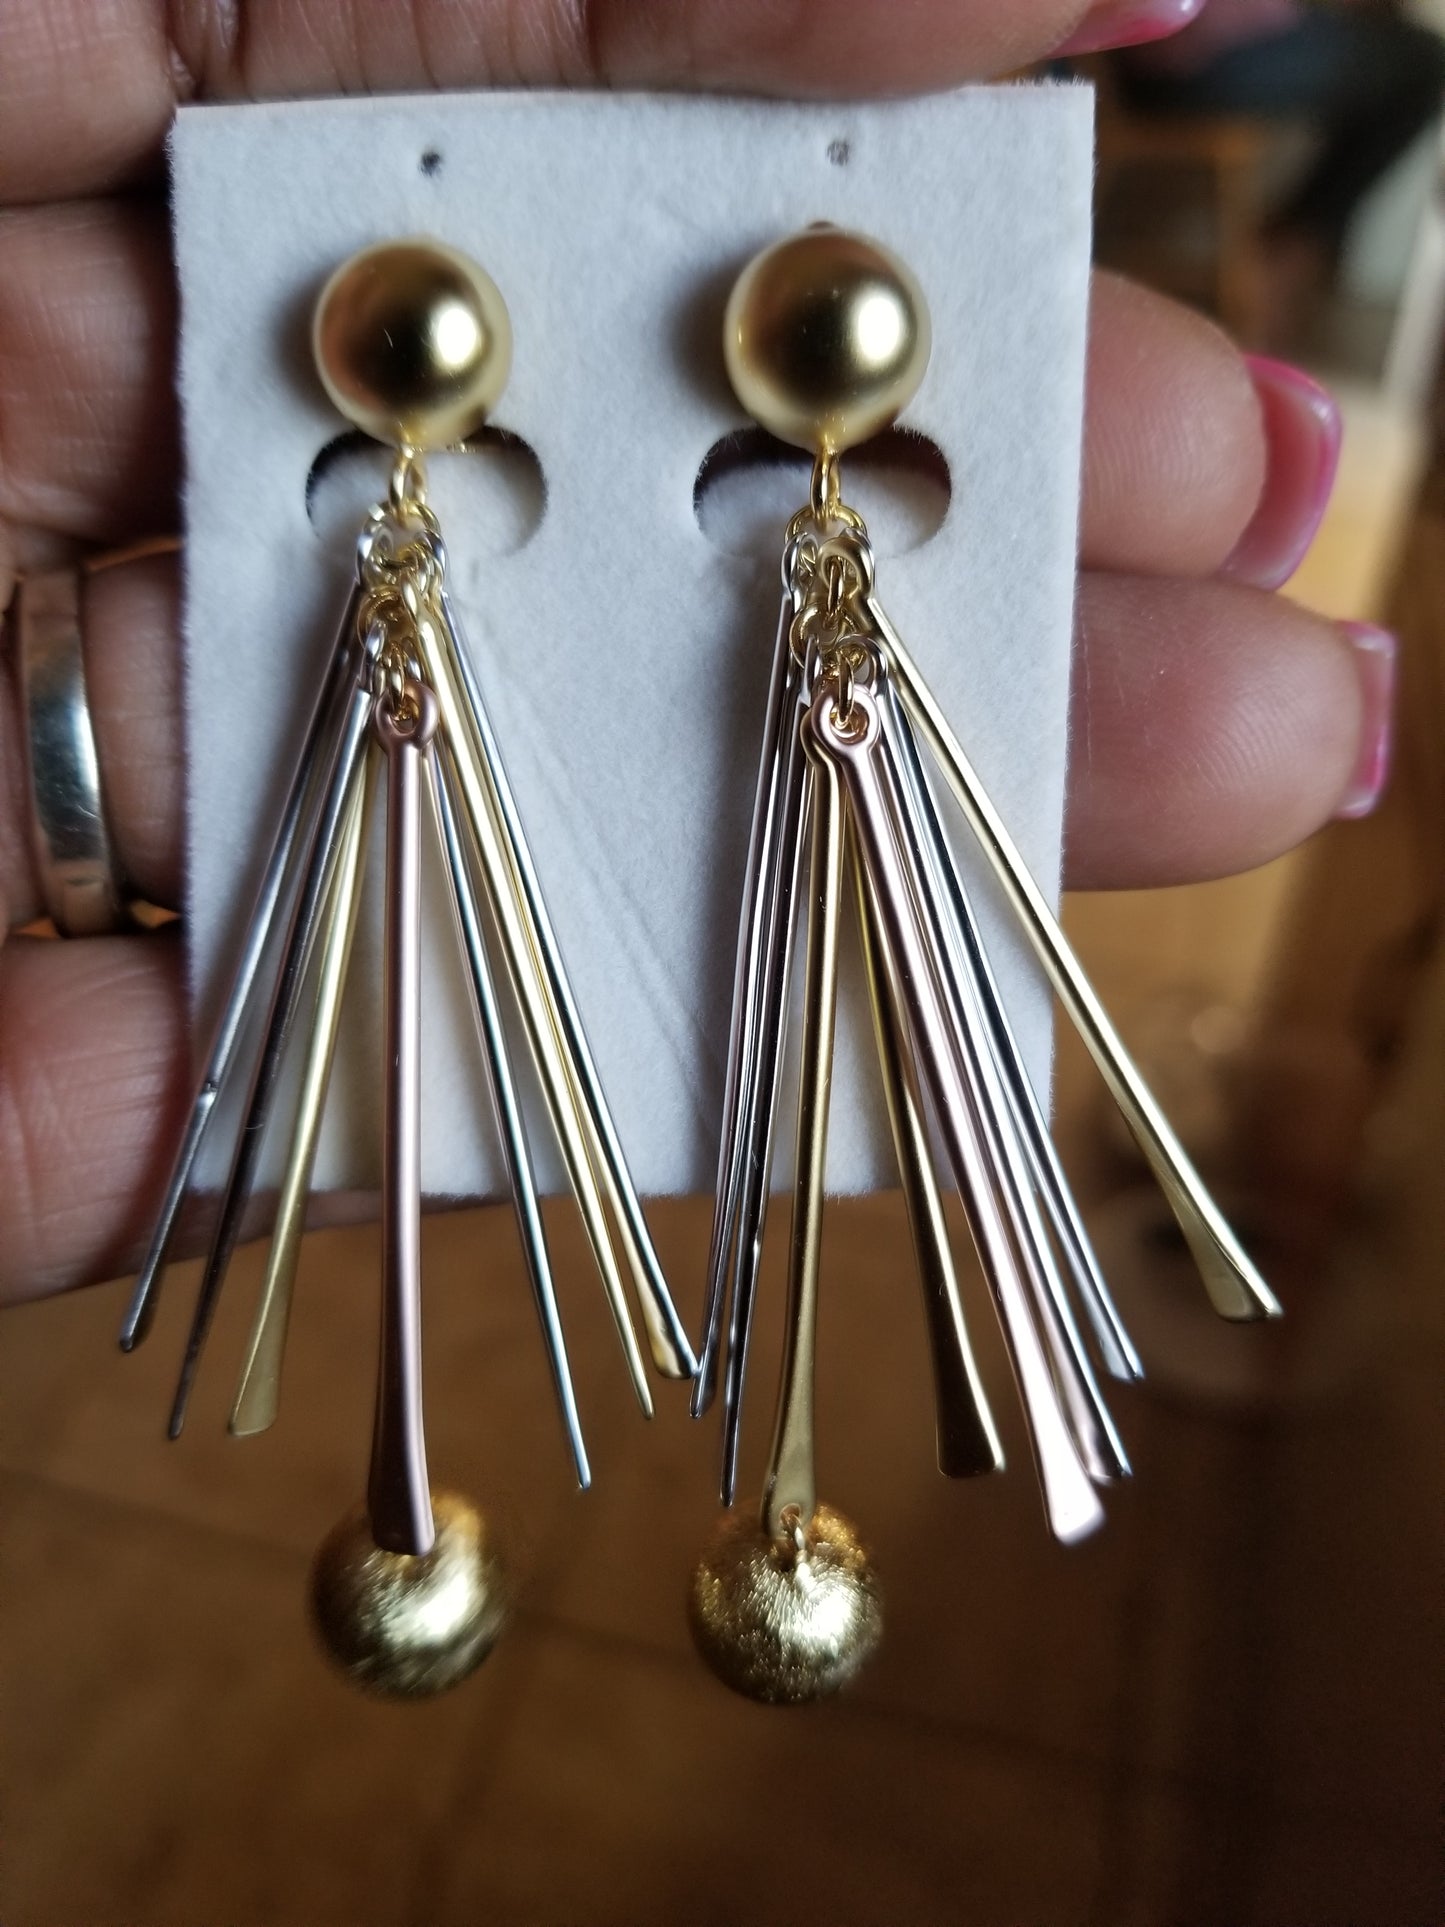 Latest drop-earrings in 3 tone electroplating. Top quality made hypoallergenic. Long lasting. Light weight earrings